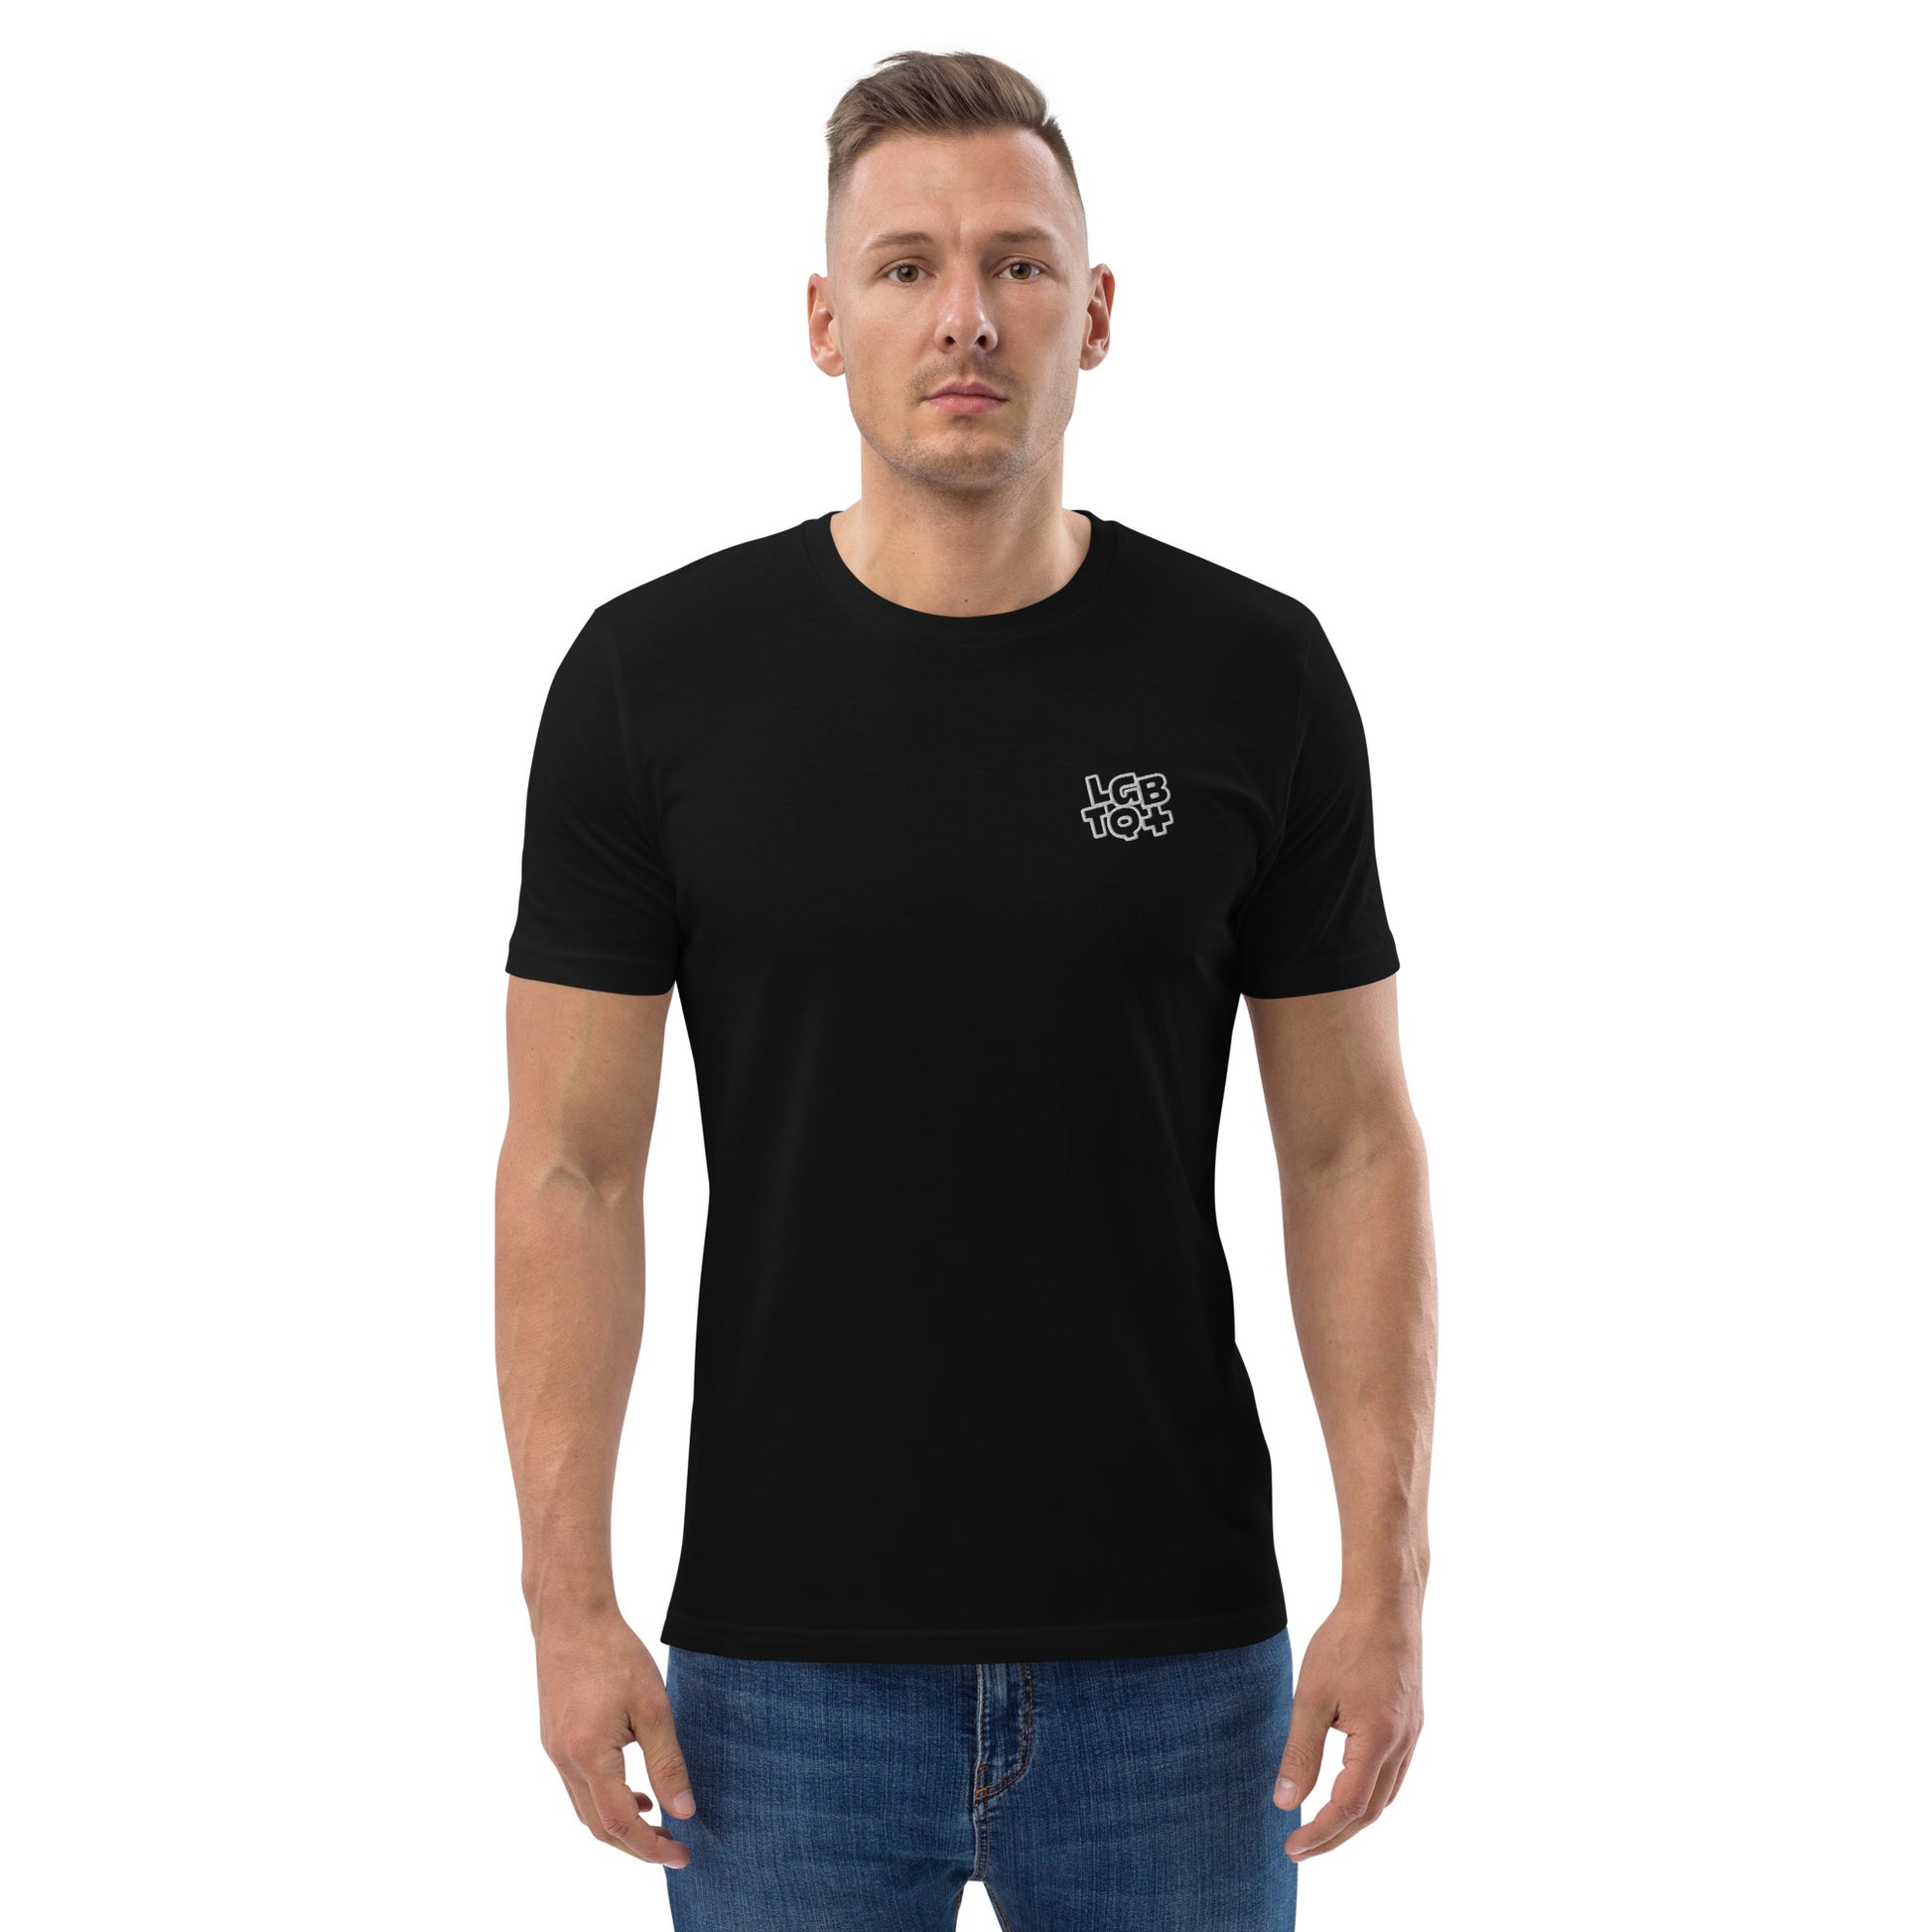 Male model wearing a fitted black organic cotton t-shirt with a small embroidered LGBTQ+ design on the left chest. Available in sizes S to 3XL.